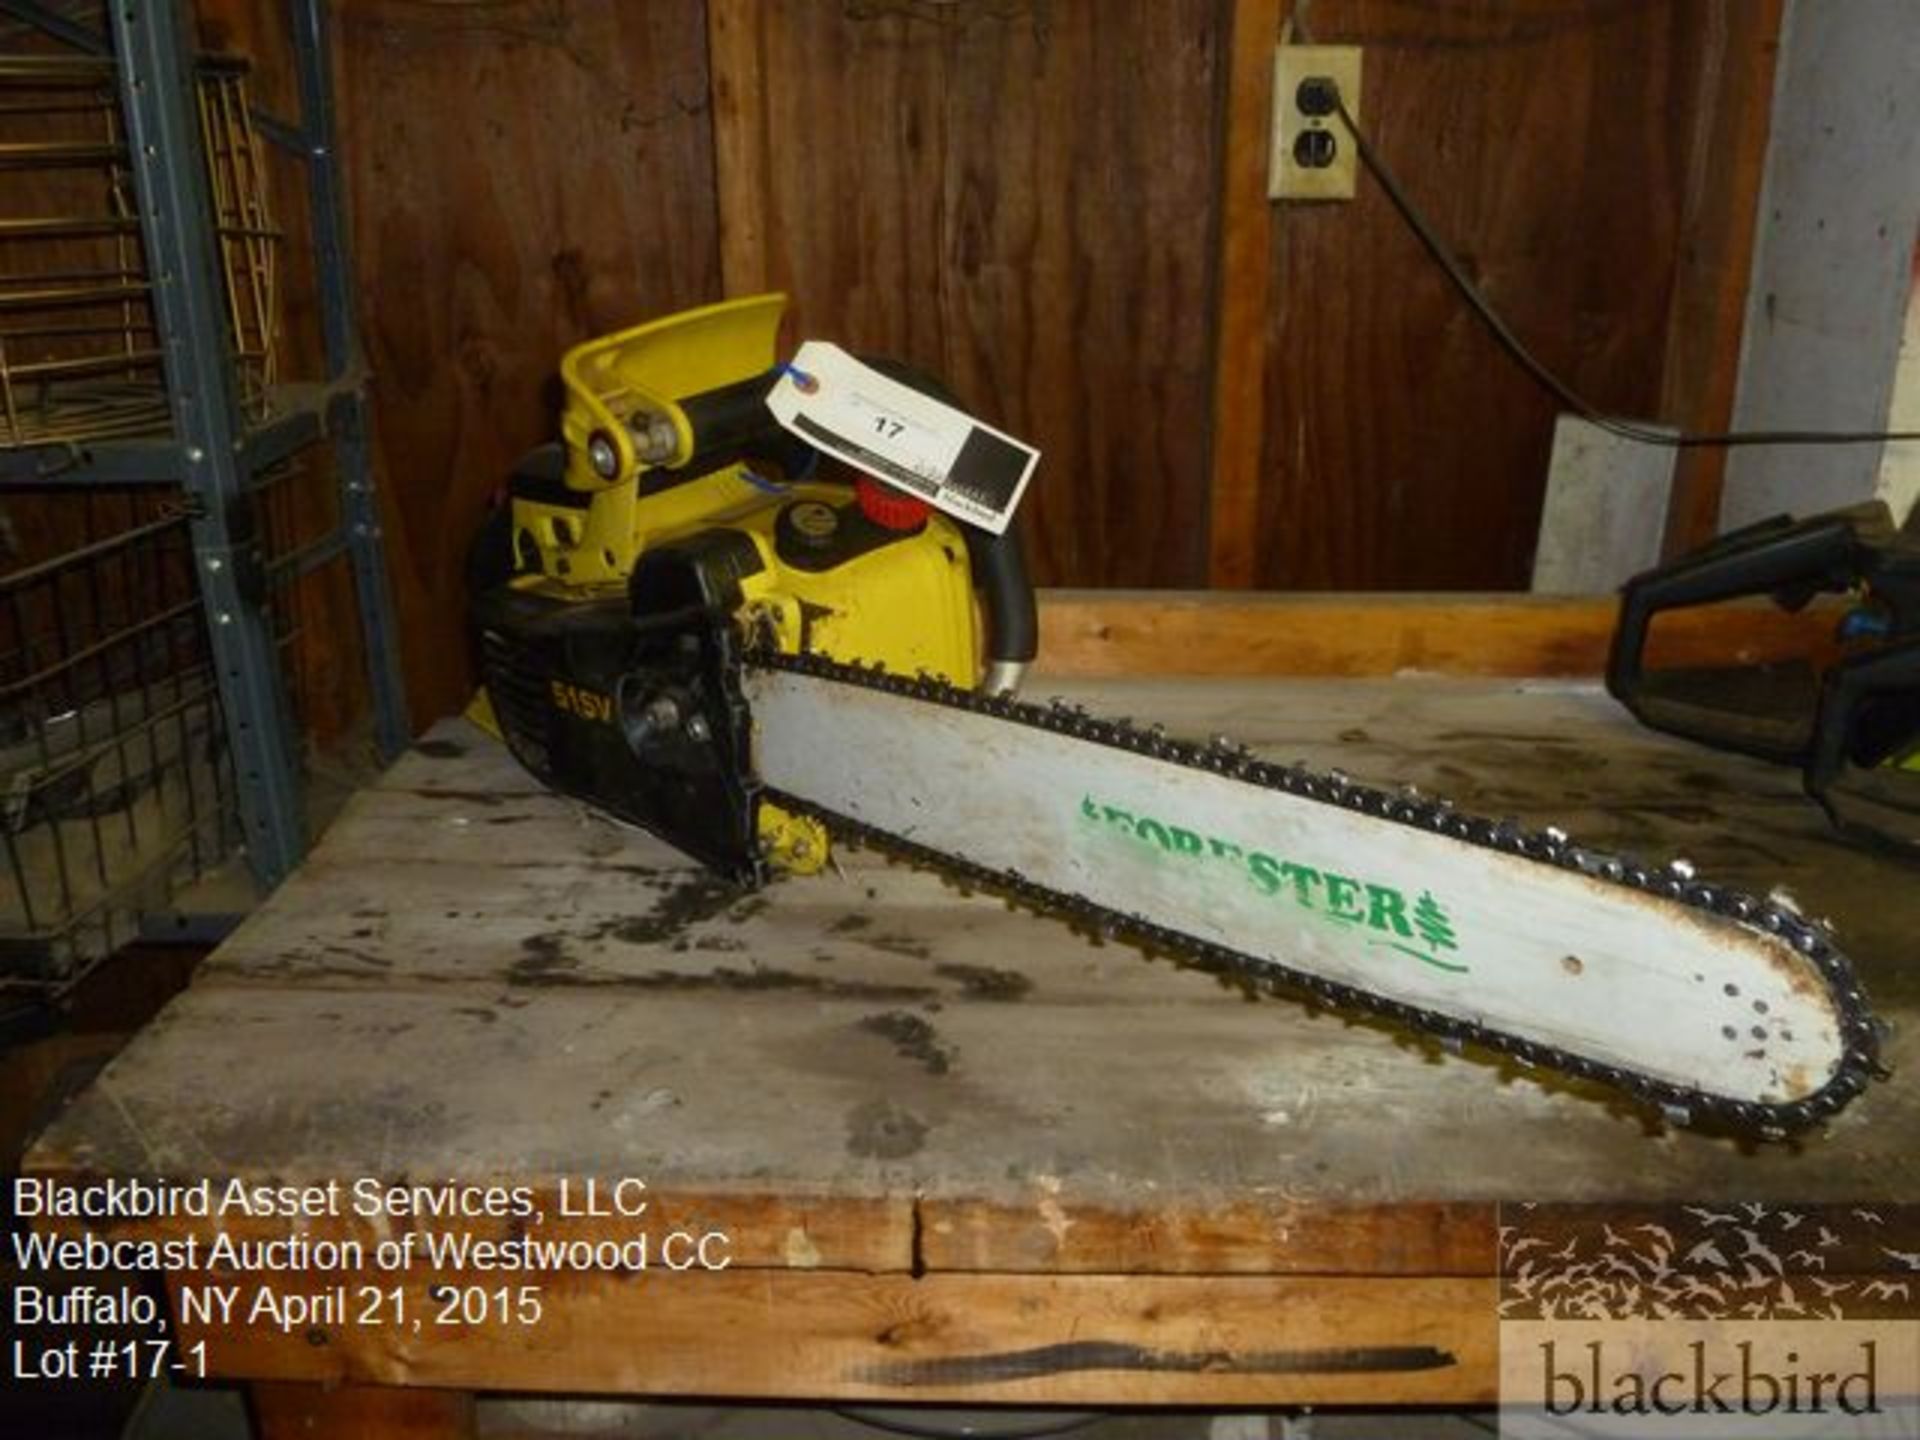 John Deere 515 Forester chain saw - Image 2 of 3